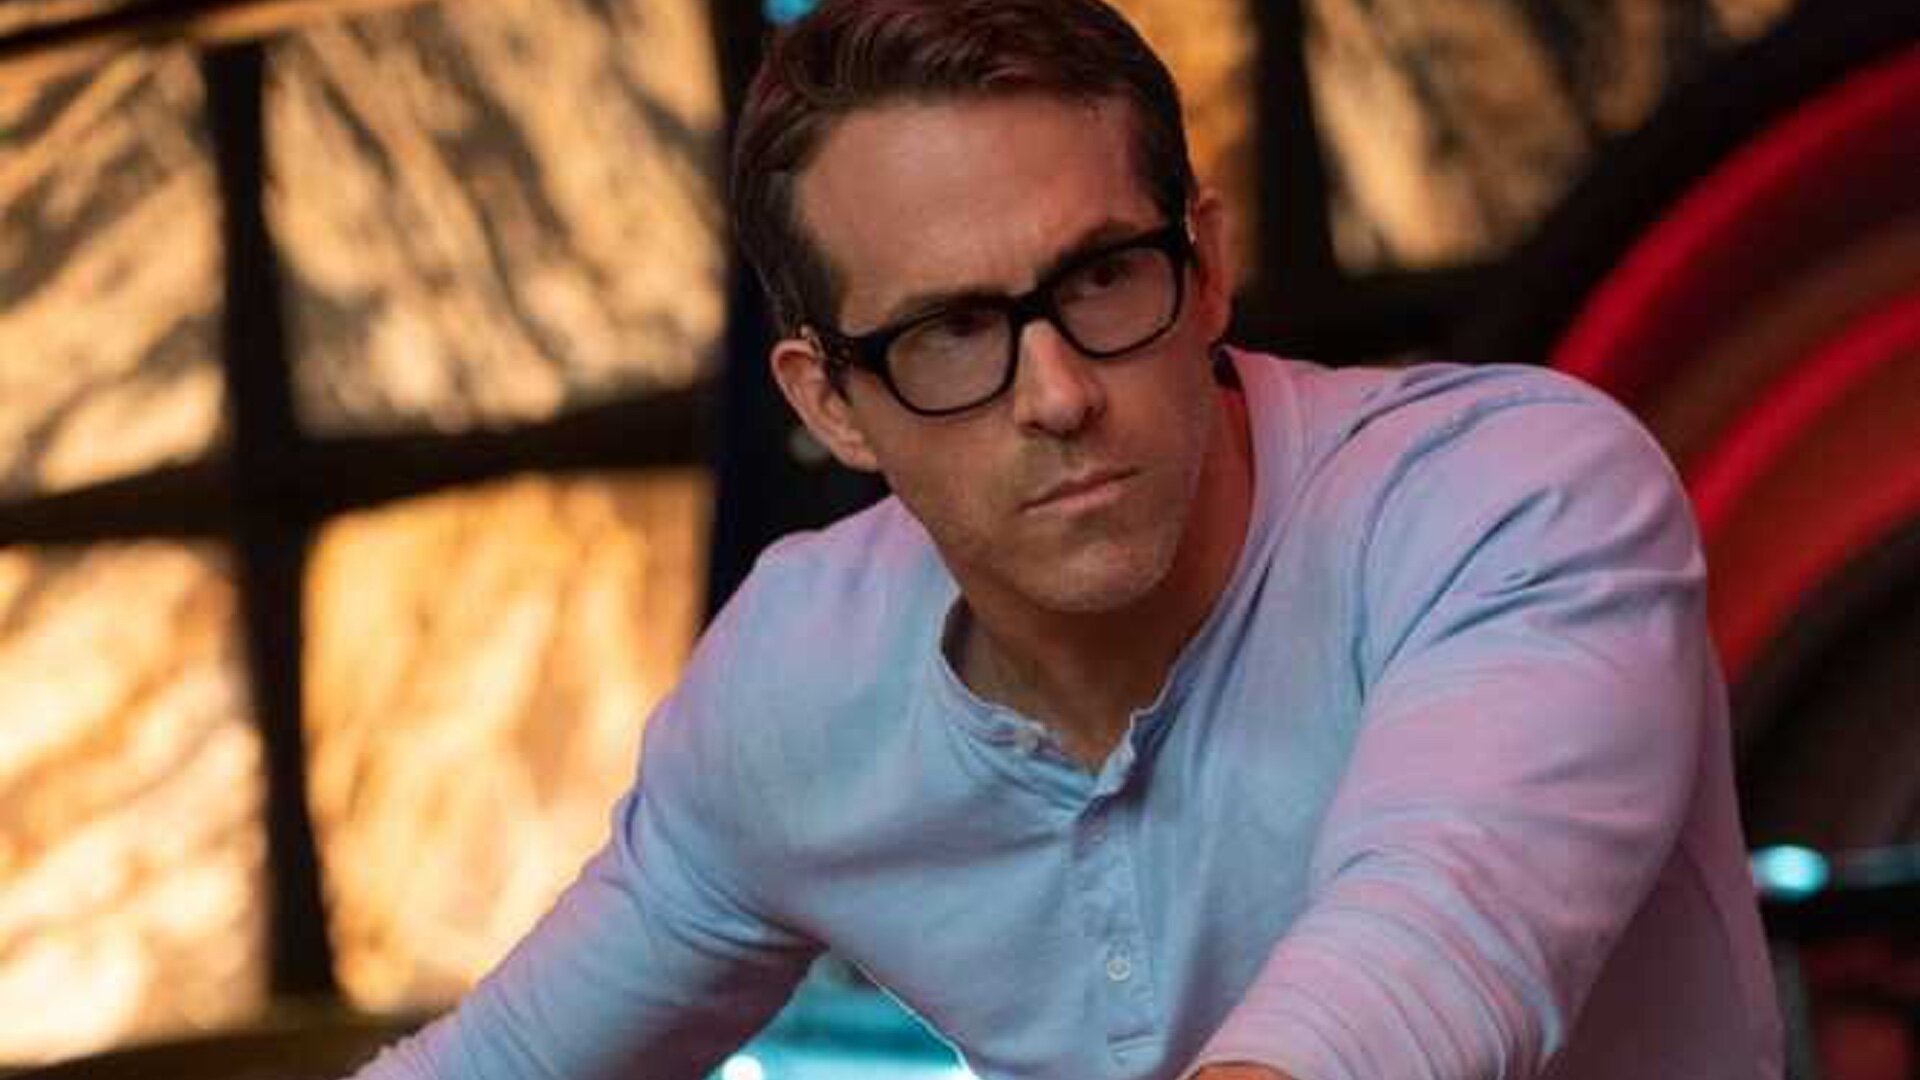 First Look at Ryan Reynolds in His